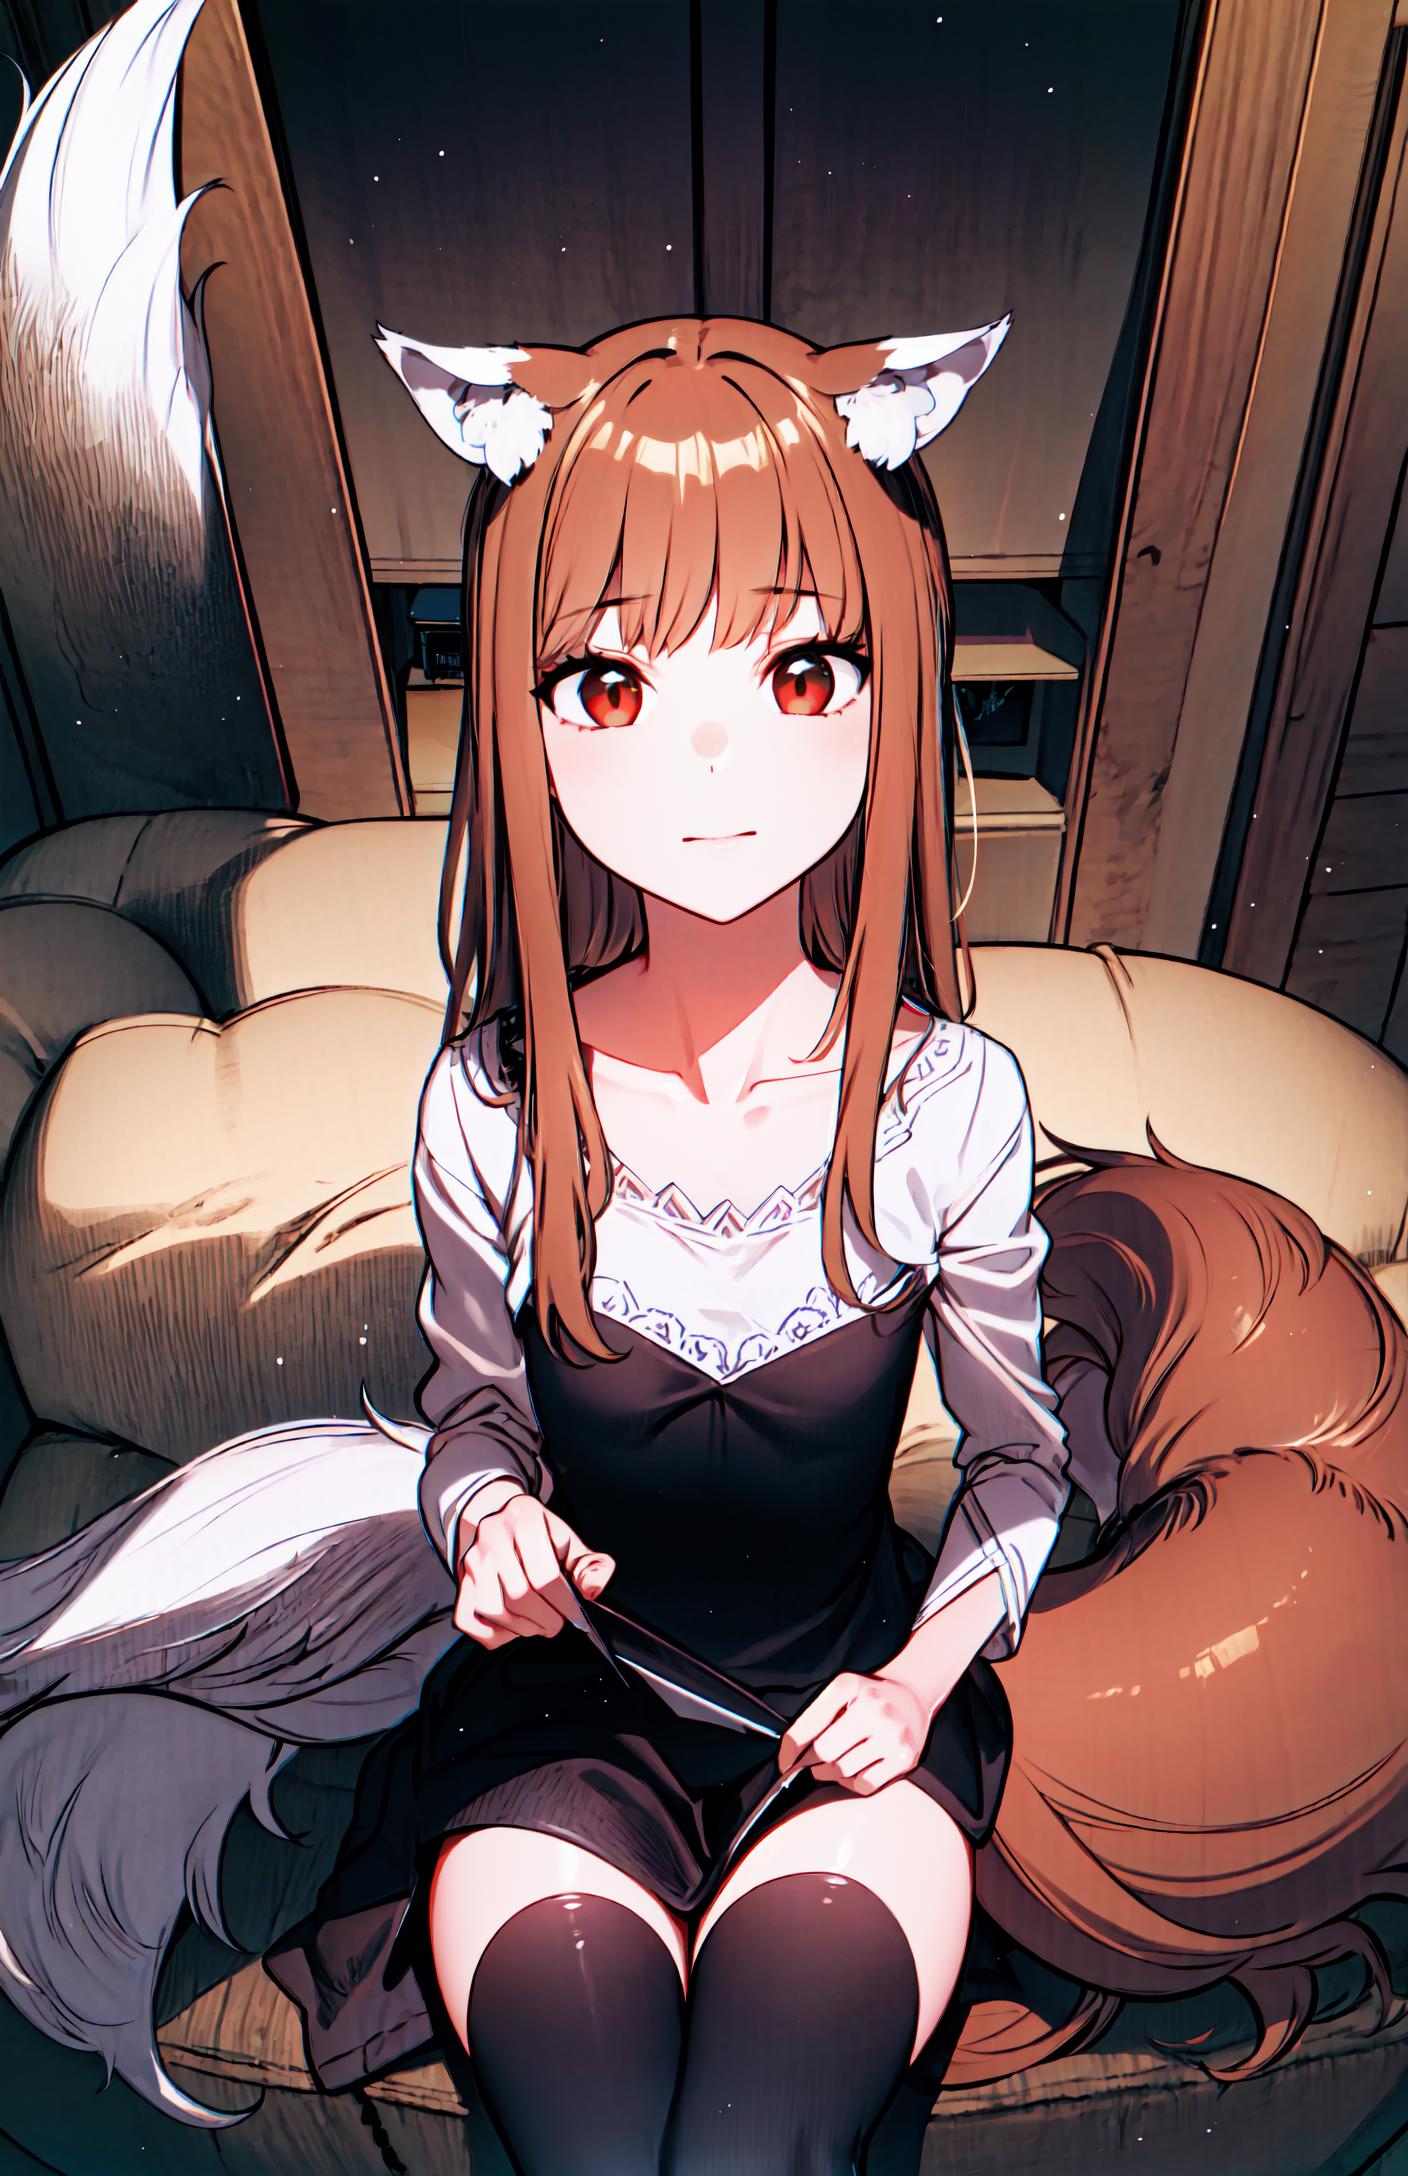 Holo (Spice and Wolf) image by yangliwen